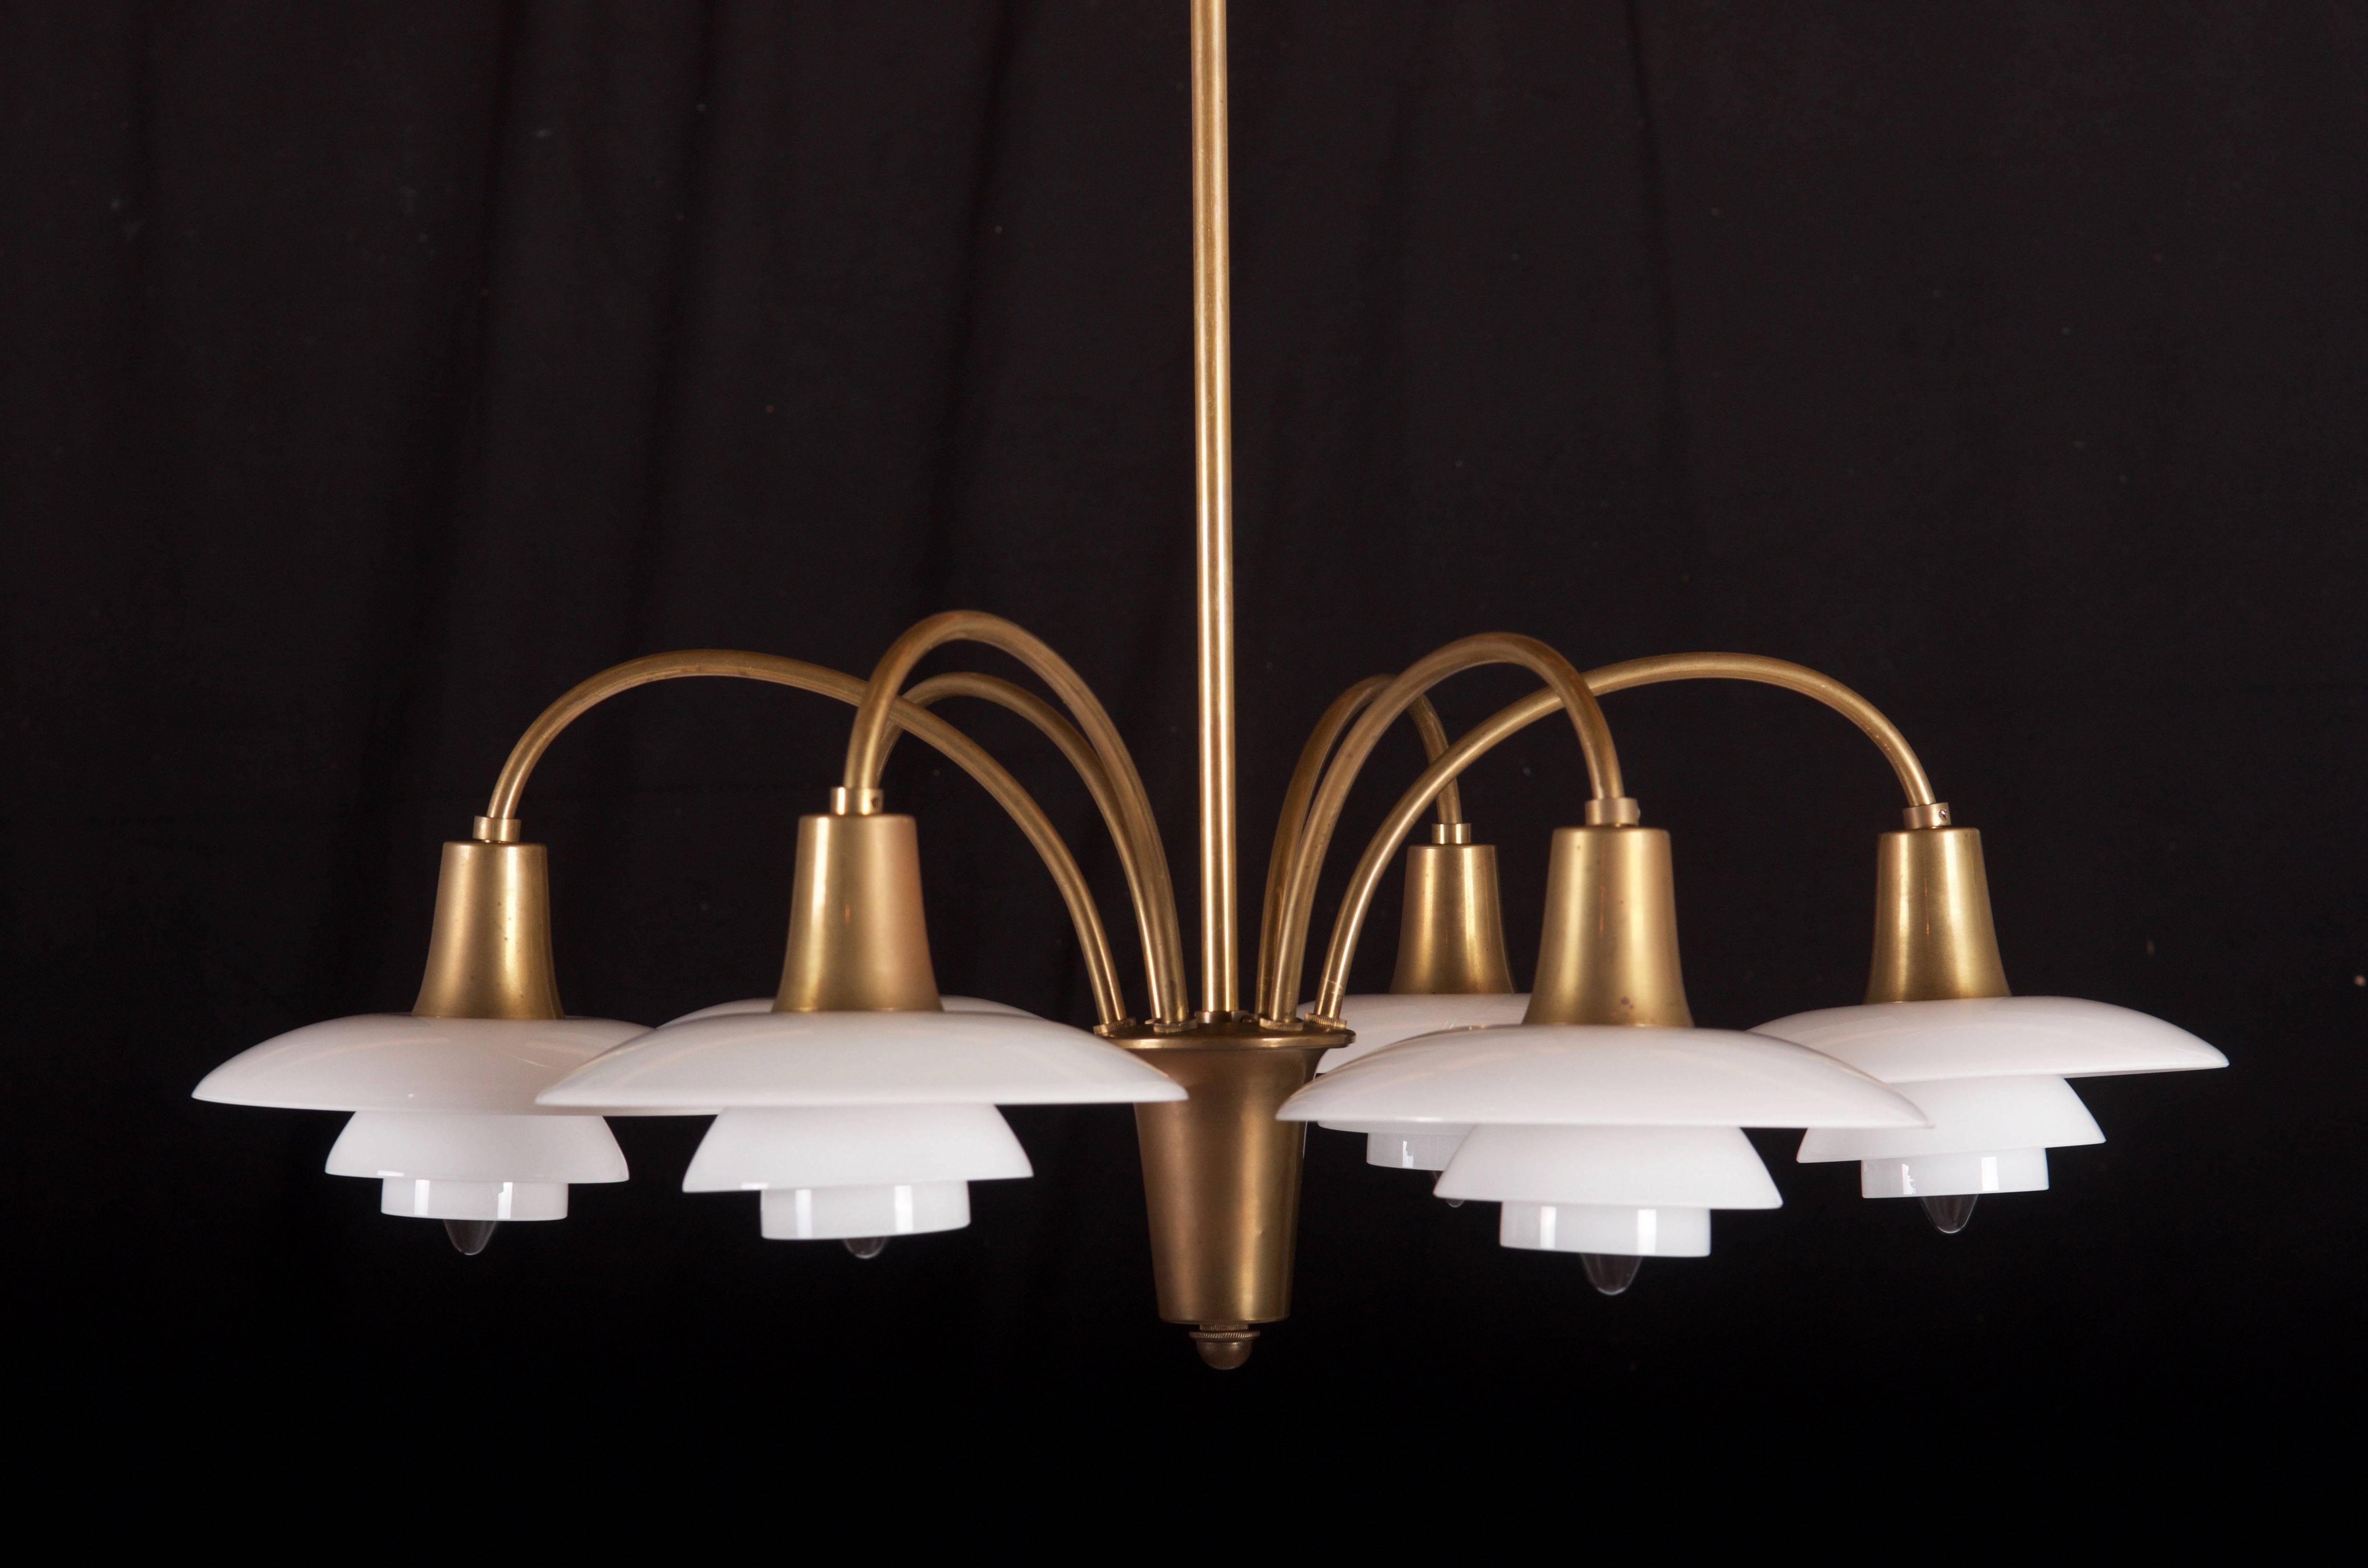 Originally designed by Poul Henningsen for Louis Poulsen in the 1930s. An exceptional example of the design. Bombardment chandelier with six branches, brass frame, conical socket covers, wire shade holders with 2/1 opal glass shade sets. This